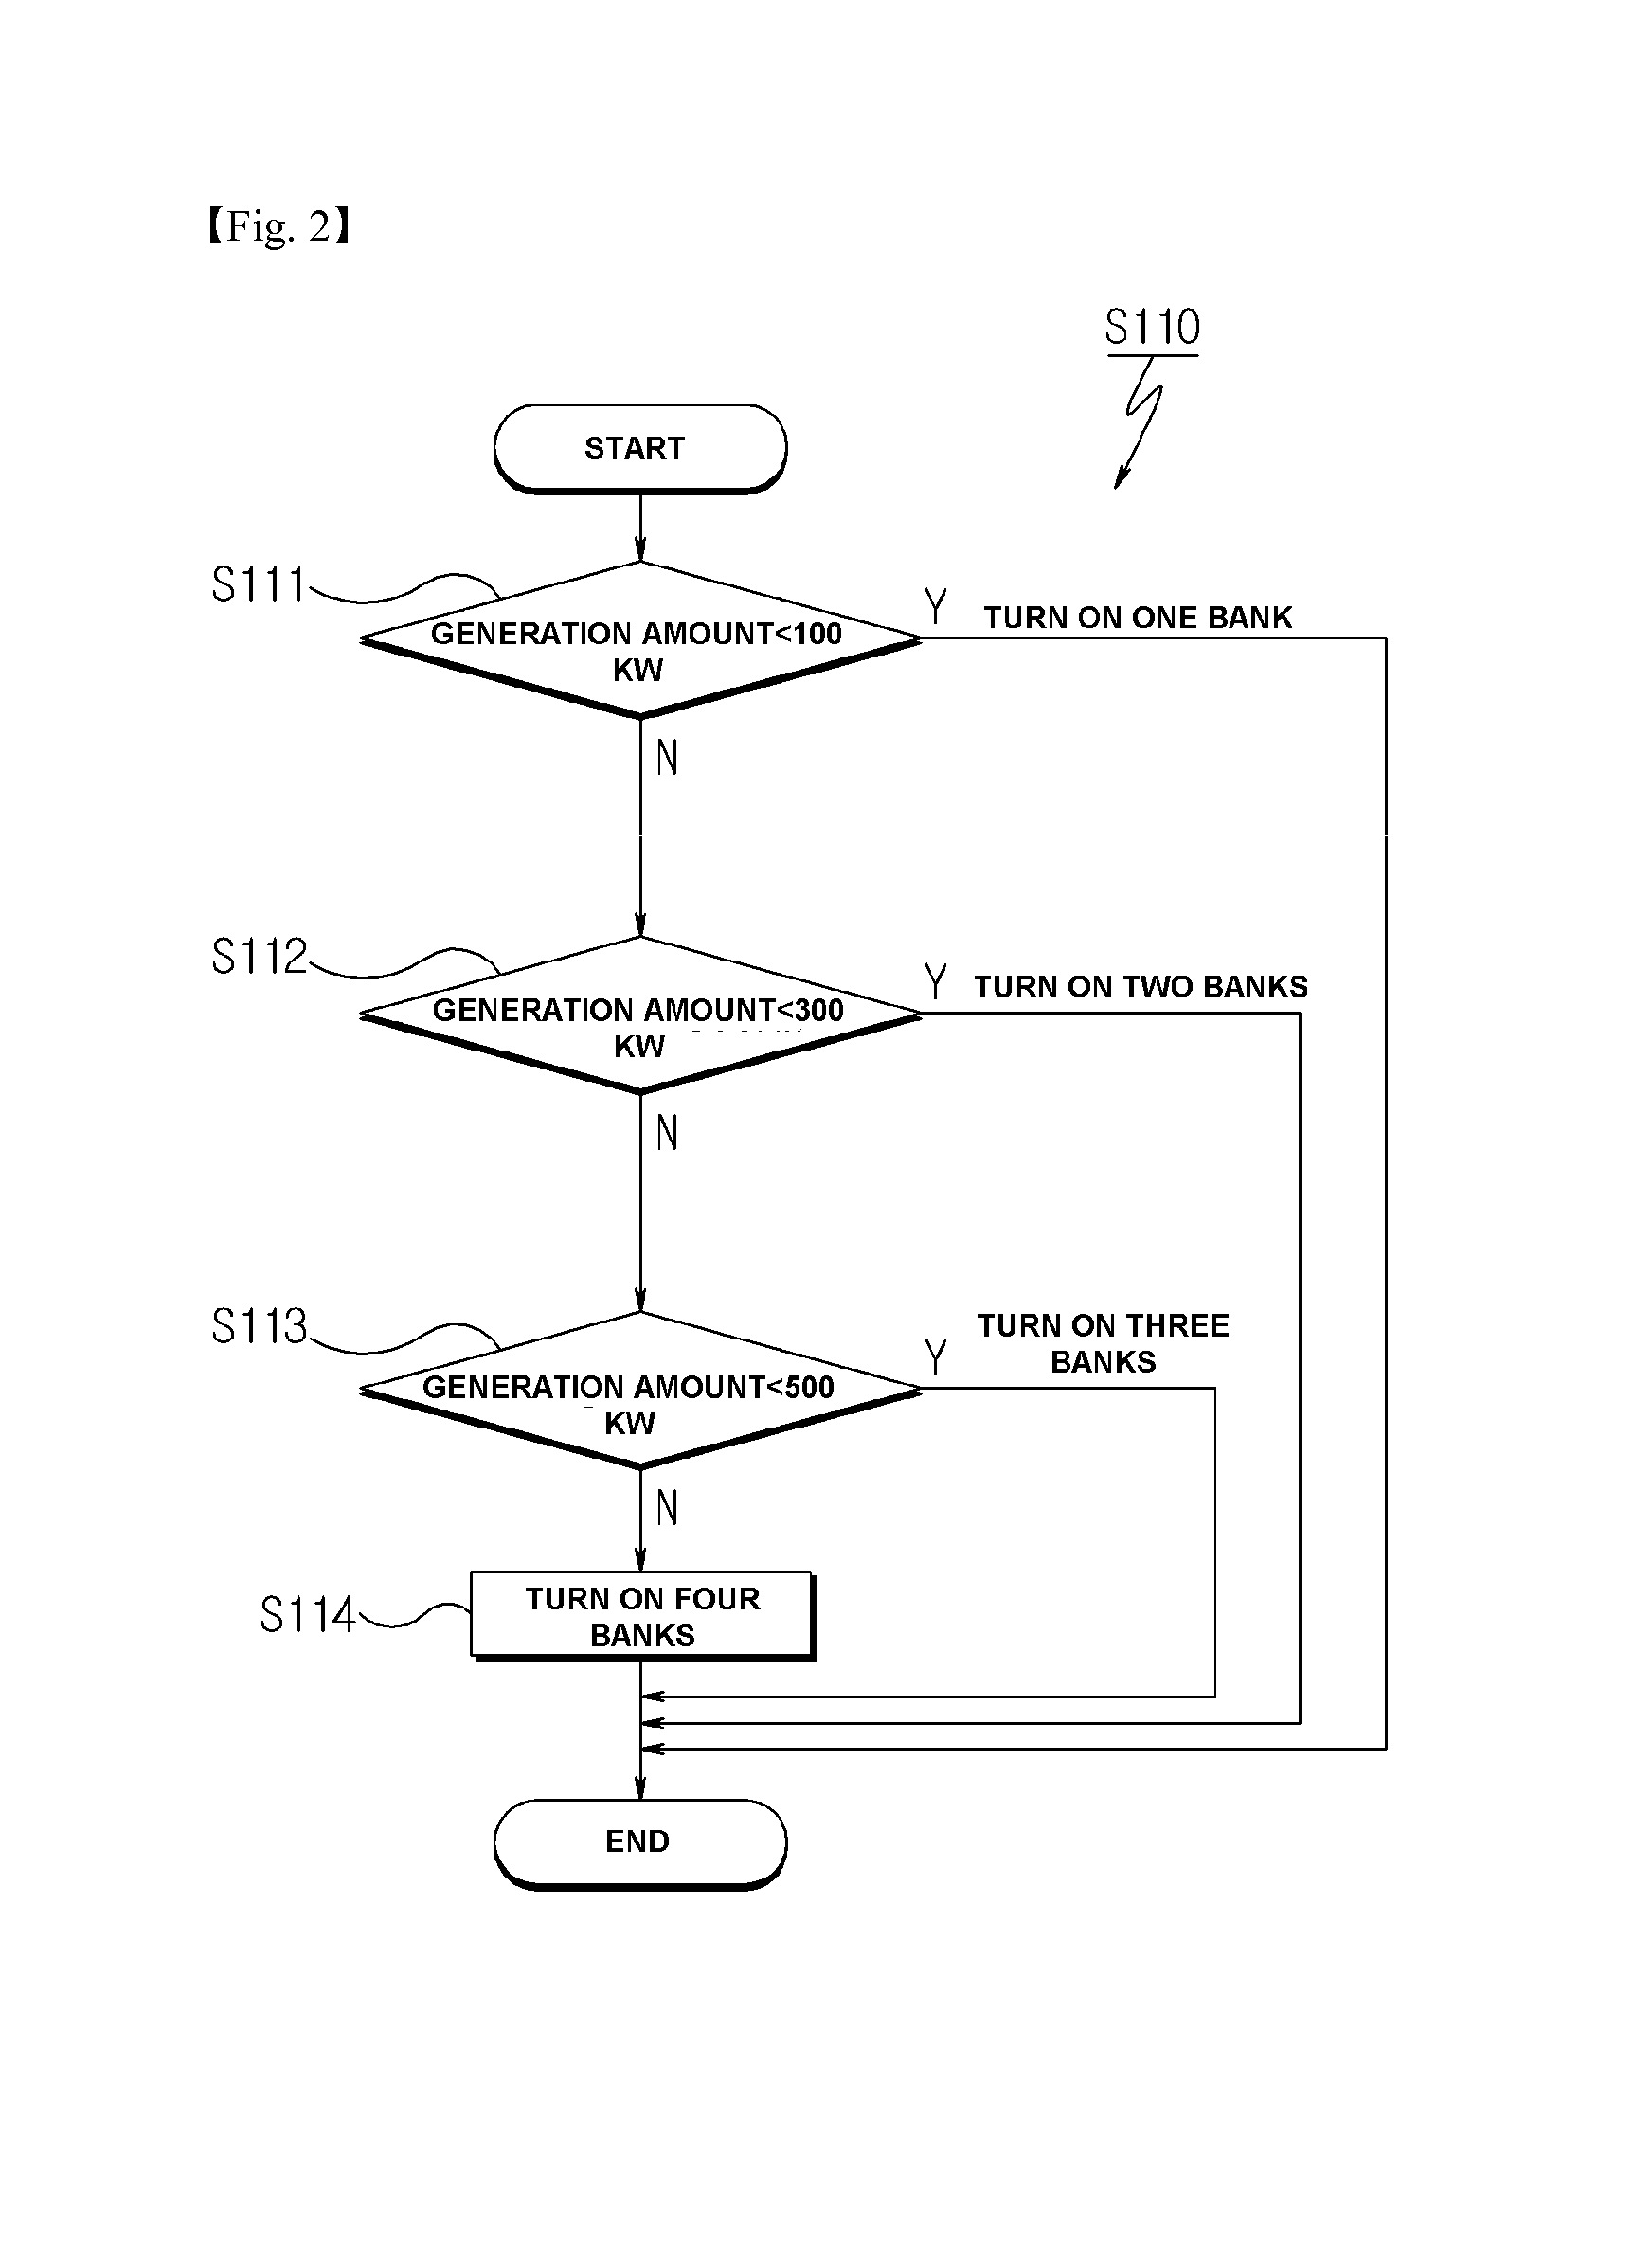 Method and Apparatus for Controlling Power Compensation of Wind Power Generating System